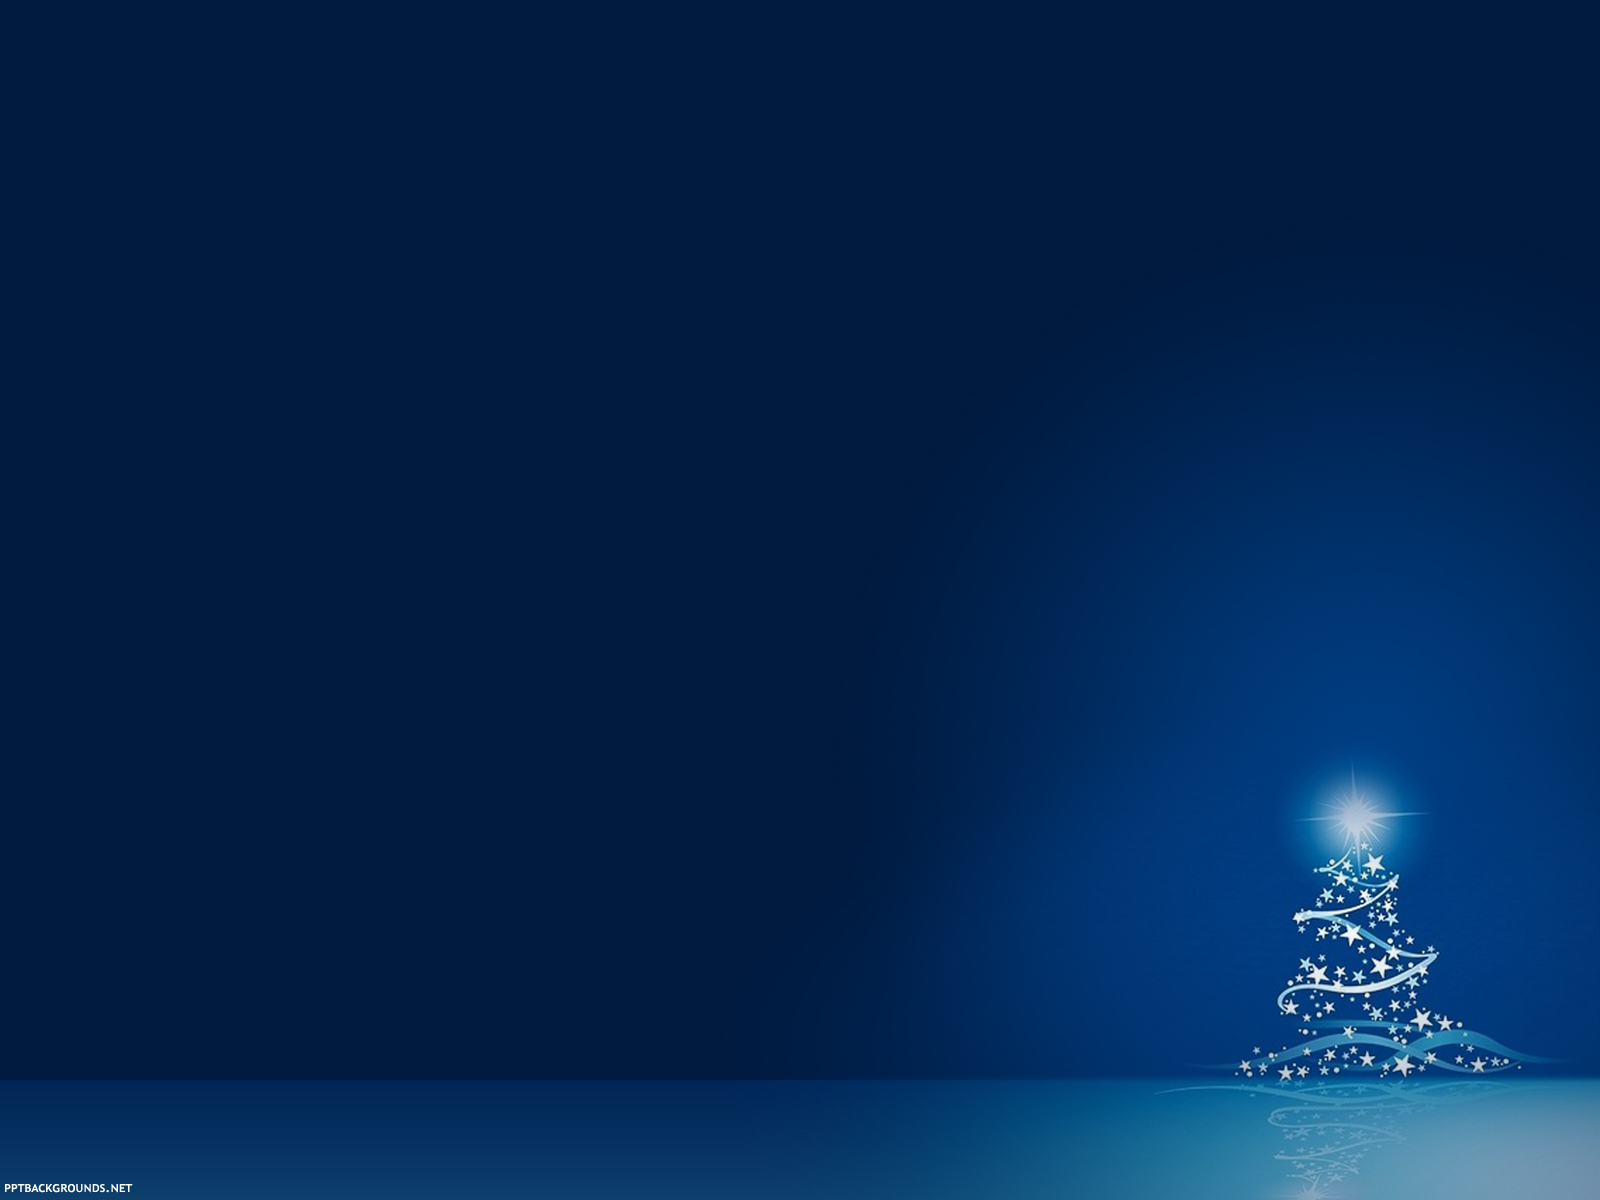 Powerpoint Christmas Blue Borders Picture